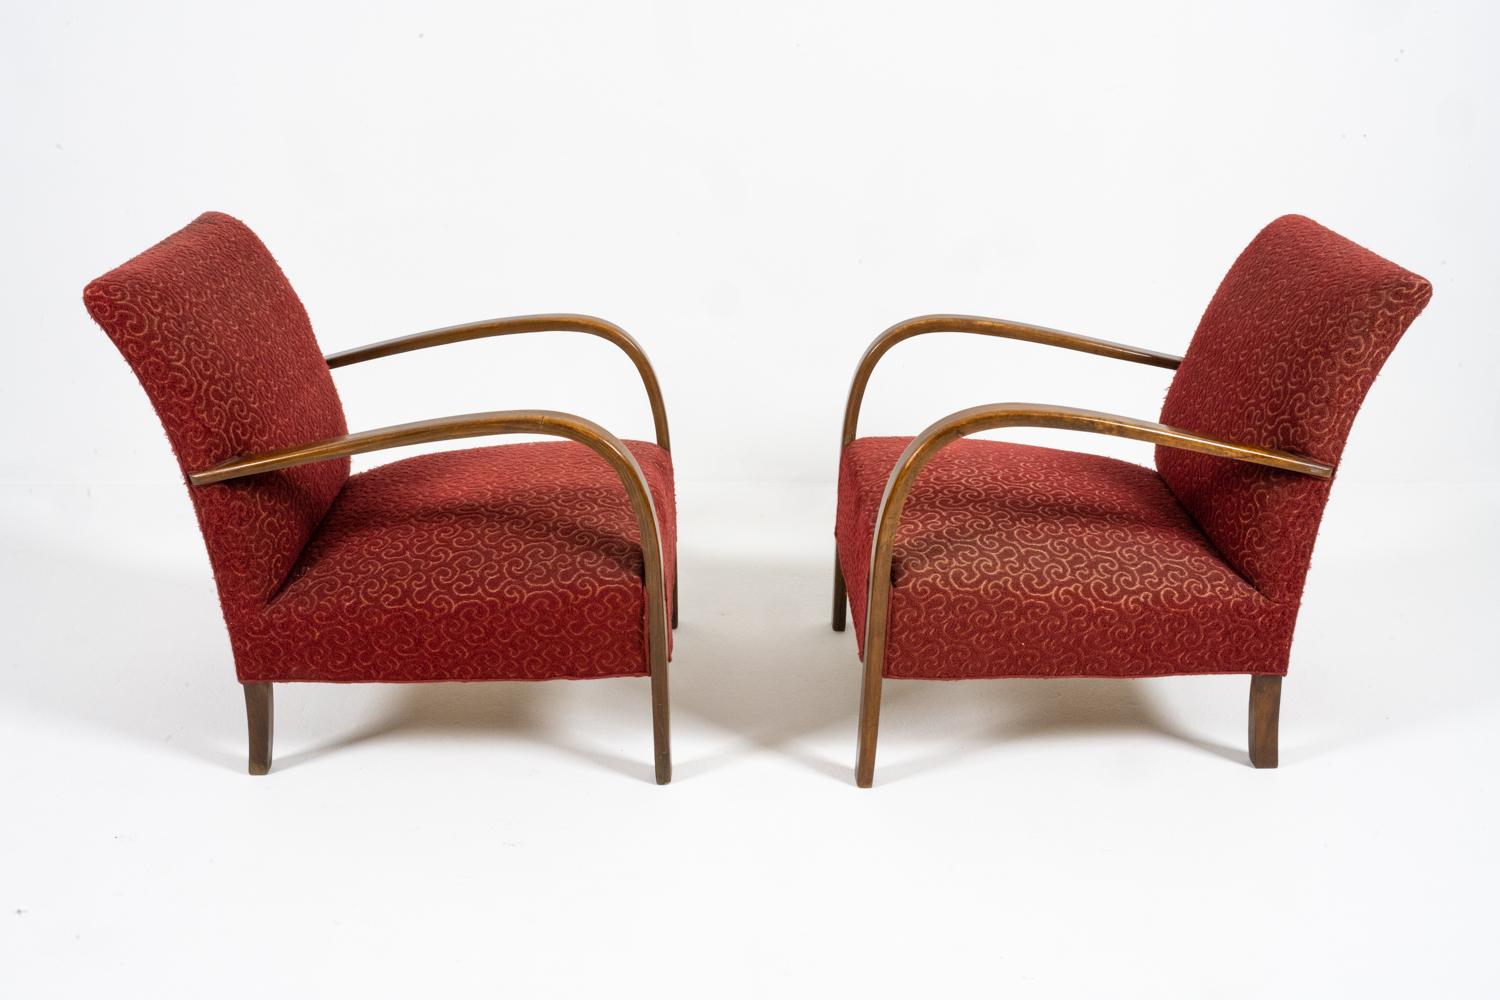 Fabric Pair of Danish Modern Lounge Chairs by Fritz Hansen, c. 1950s For Sale